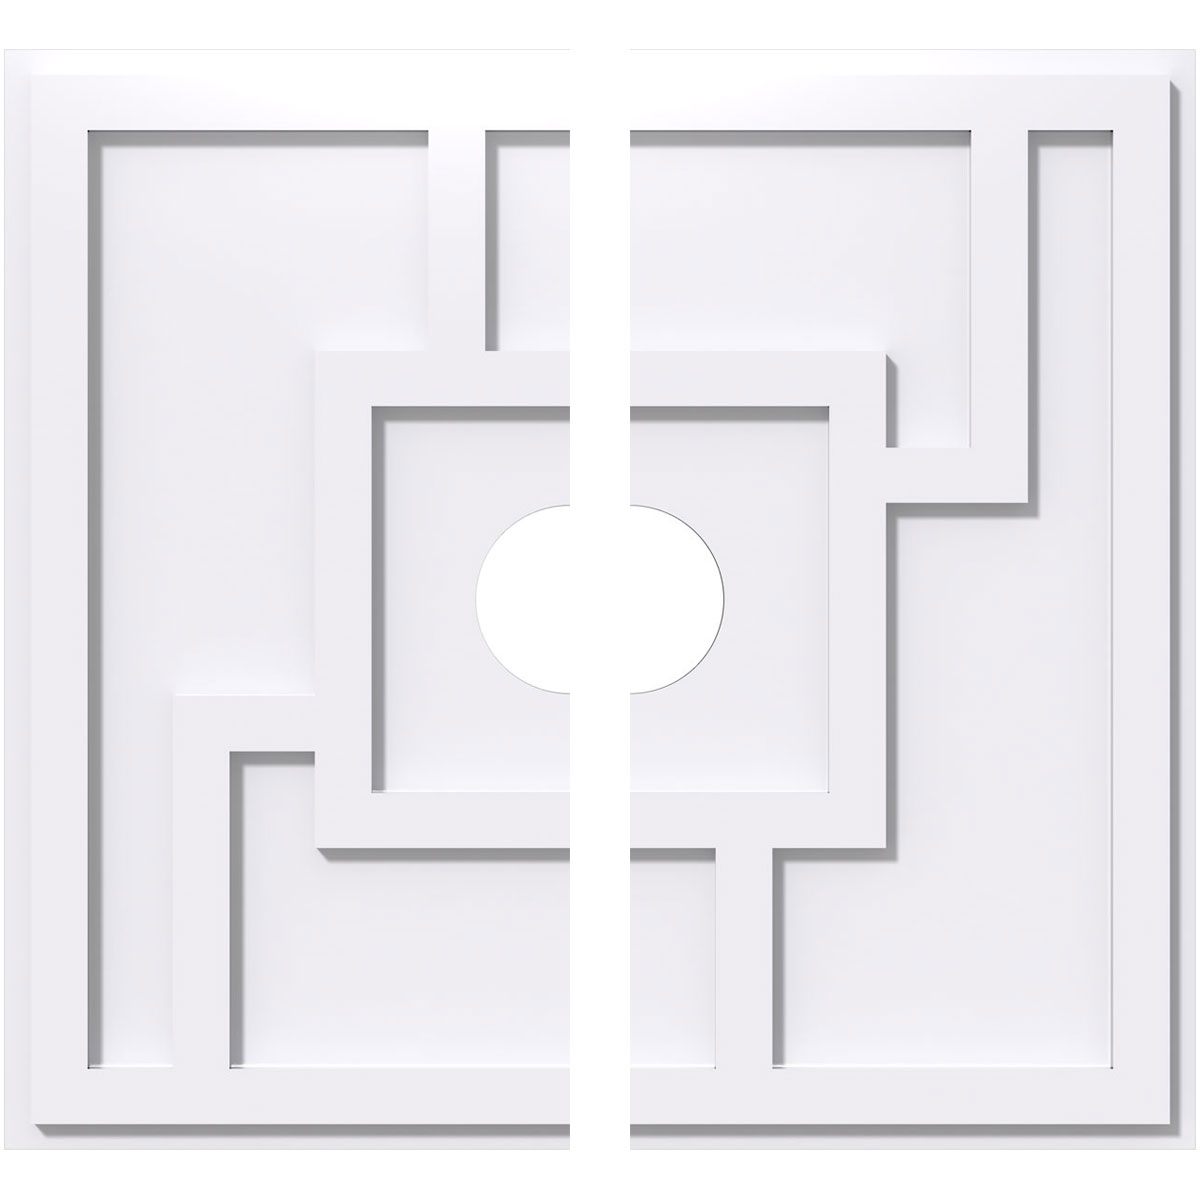 Cmp12kx2-02000 12 In. Od X 2 In. Id Square Knox Architectural Grade Pvc Contemporary Ceiling Medallion - 2 Piece